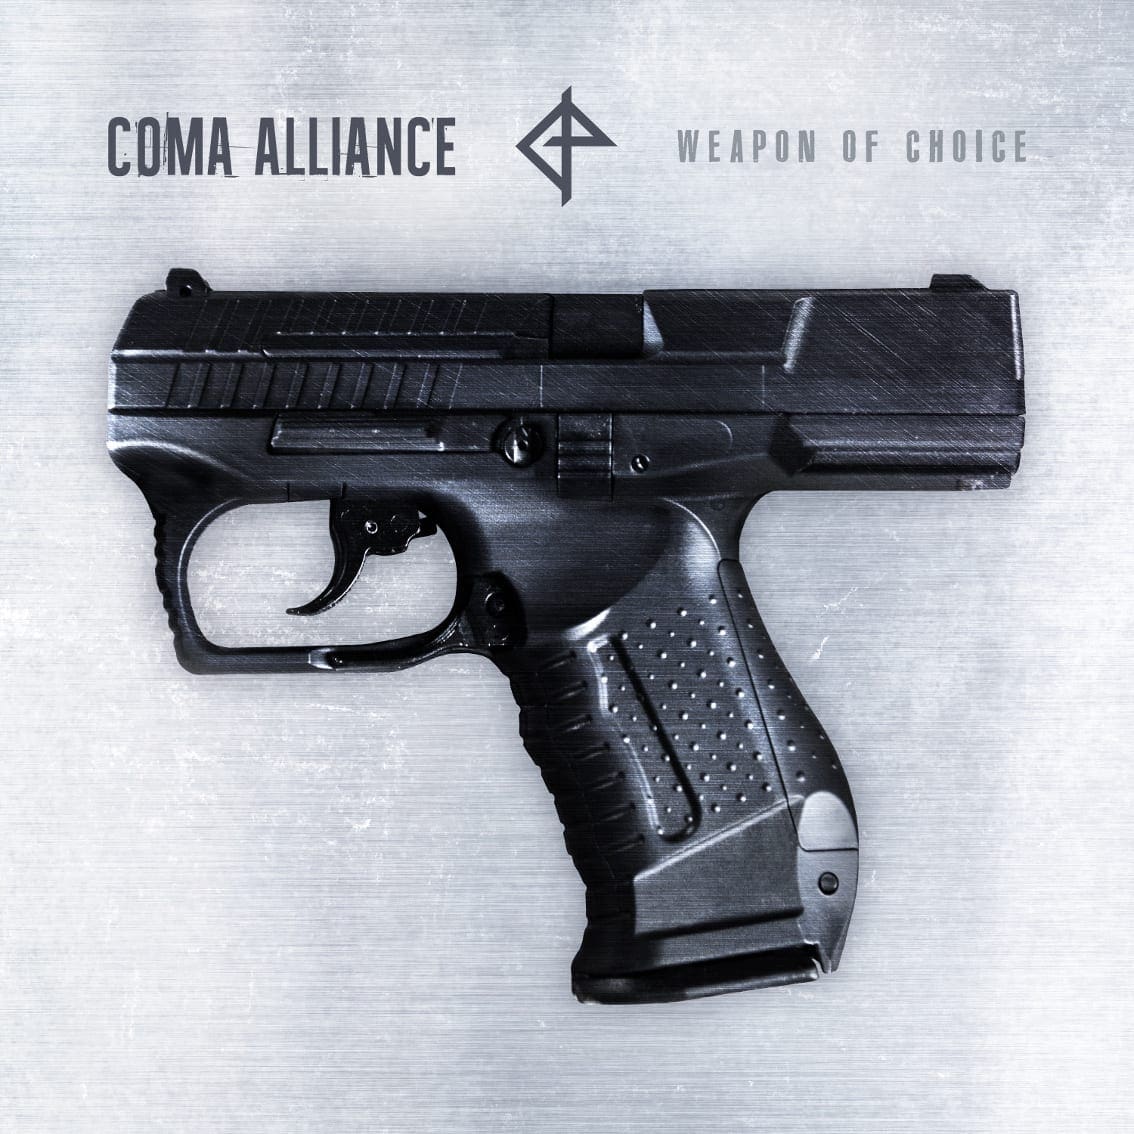 Diary of Dreams / Diorama powered project Coma Alliance launches debut album